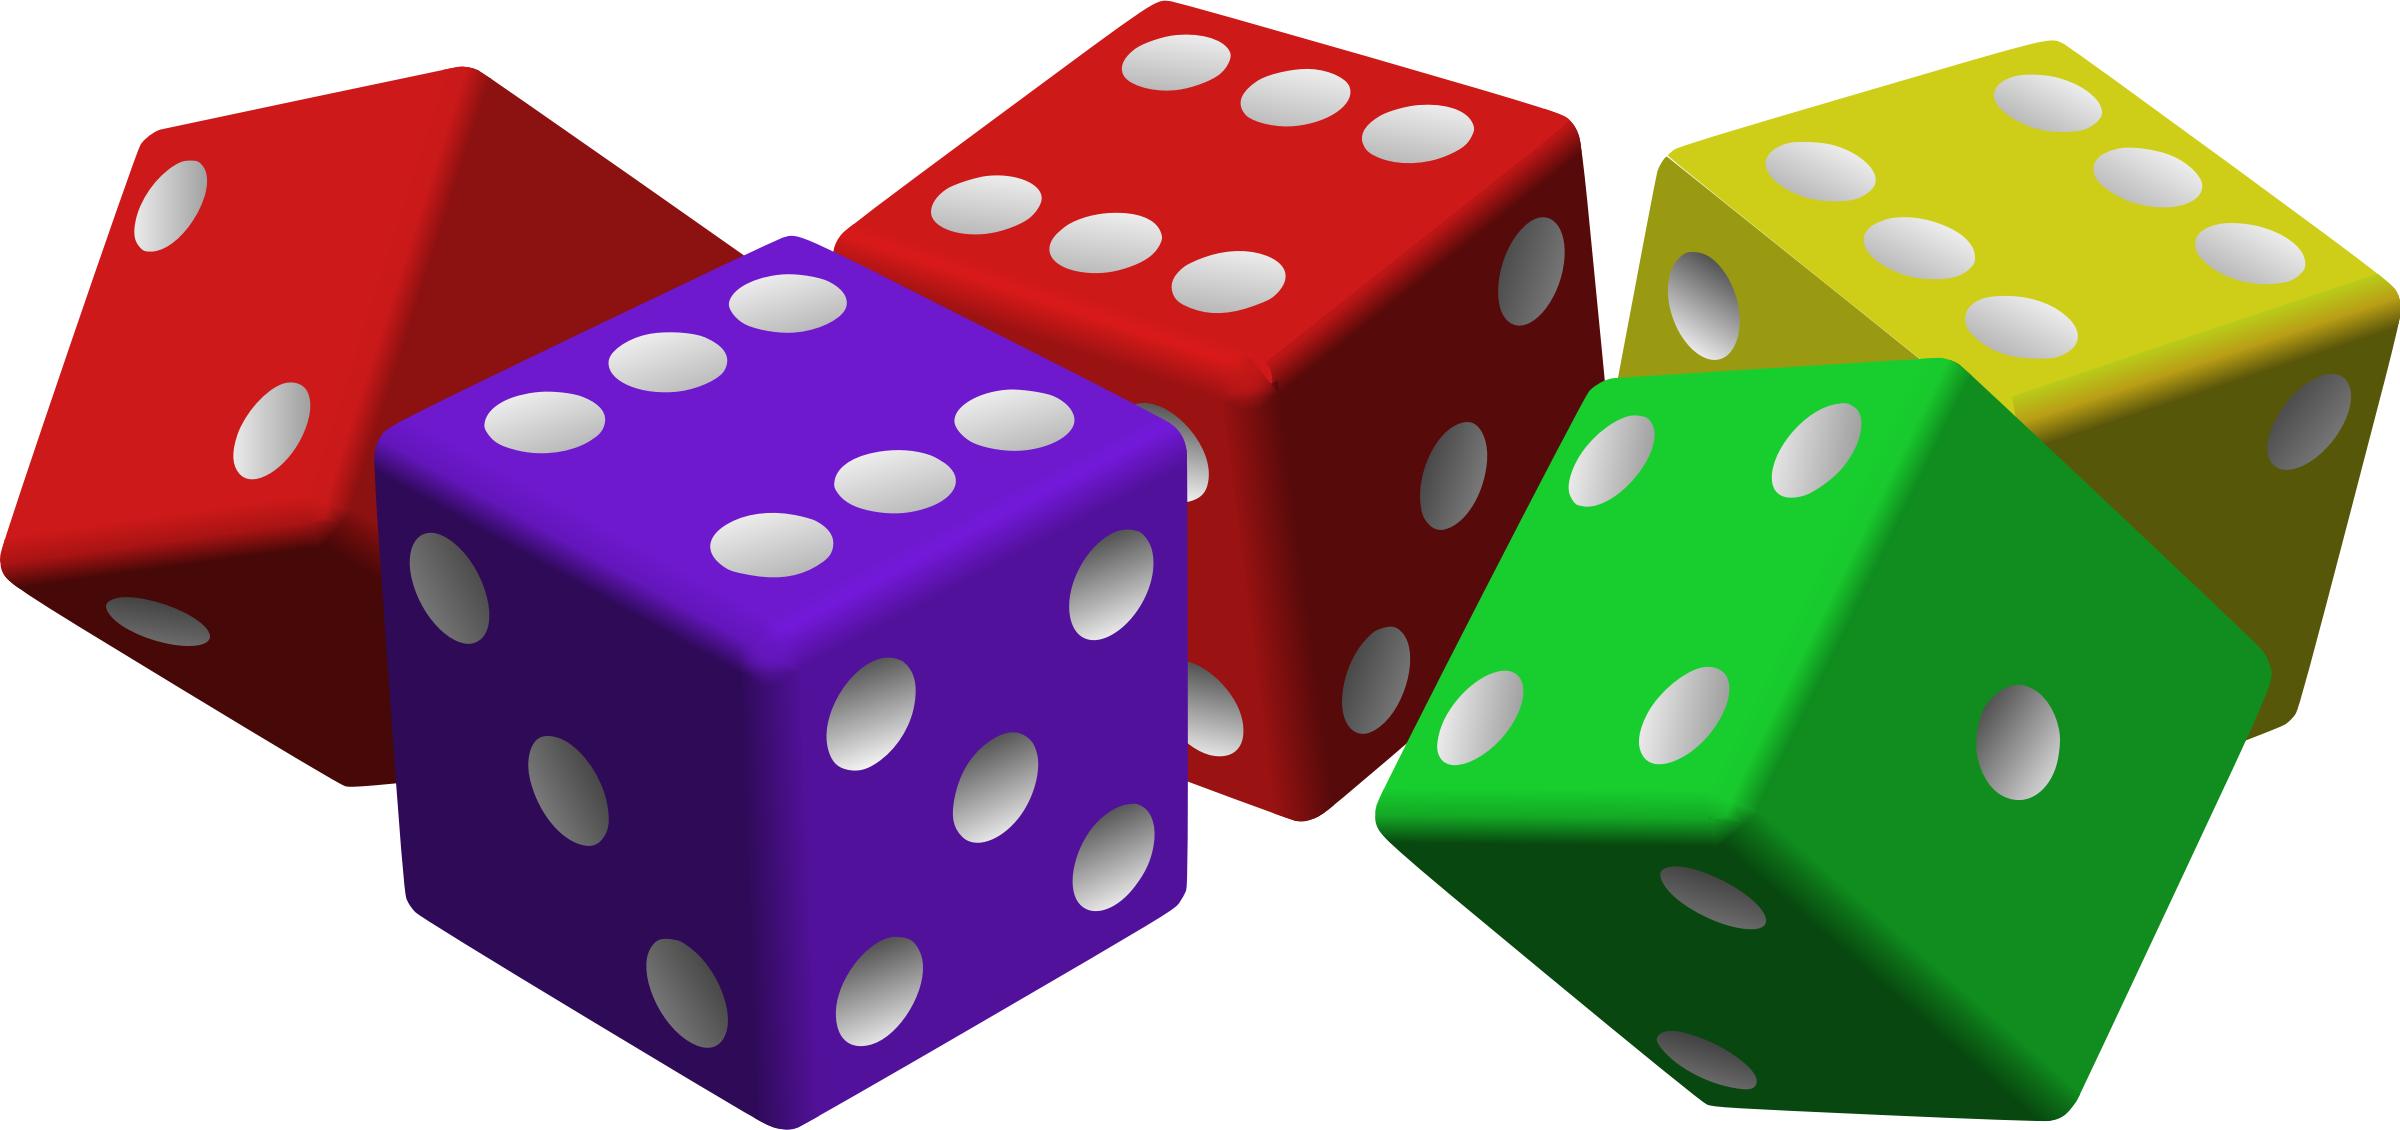 five colored dice PNG icons